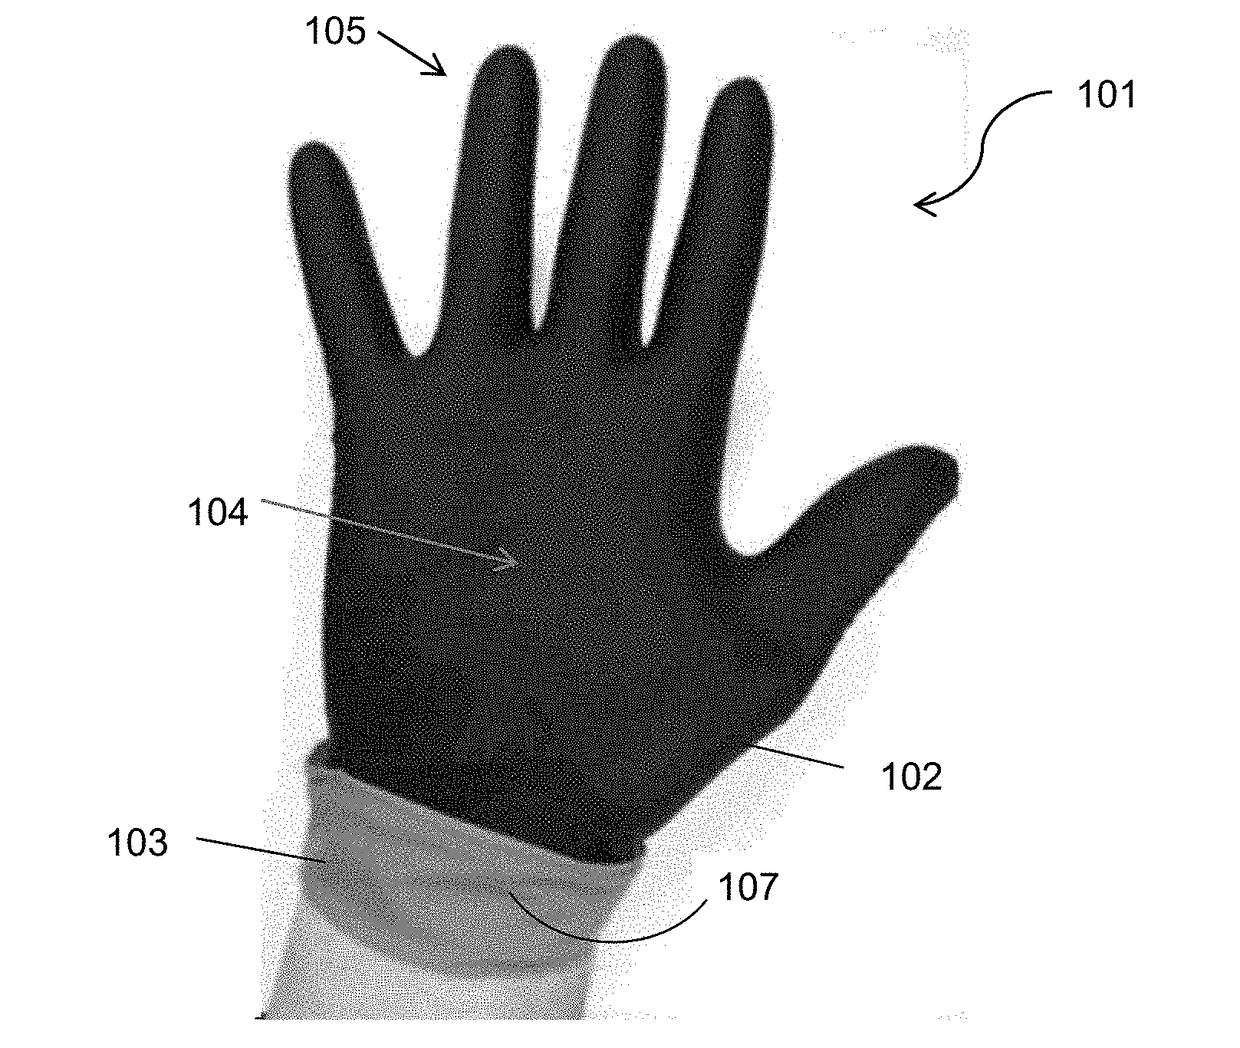 Breach Detection Glove with a High Contrast Between the Color on the Donning Side and the Grip Side of the Glove